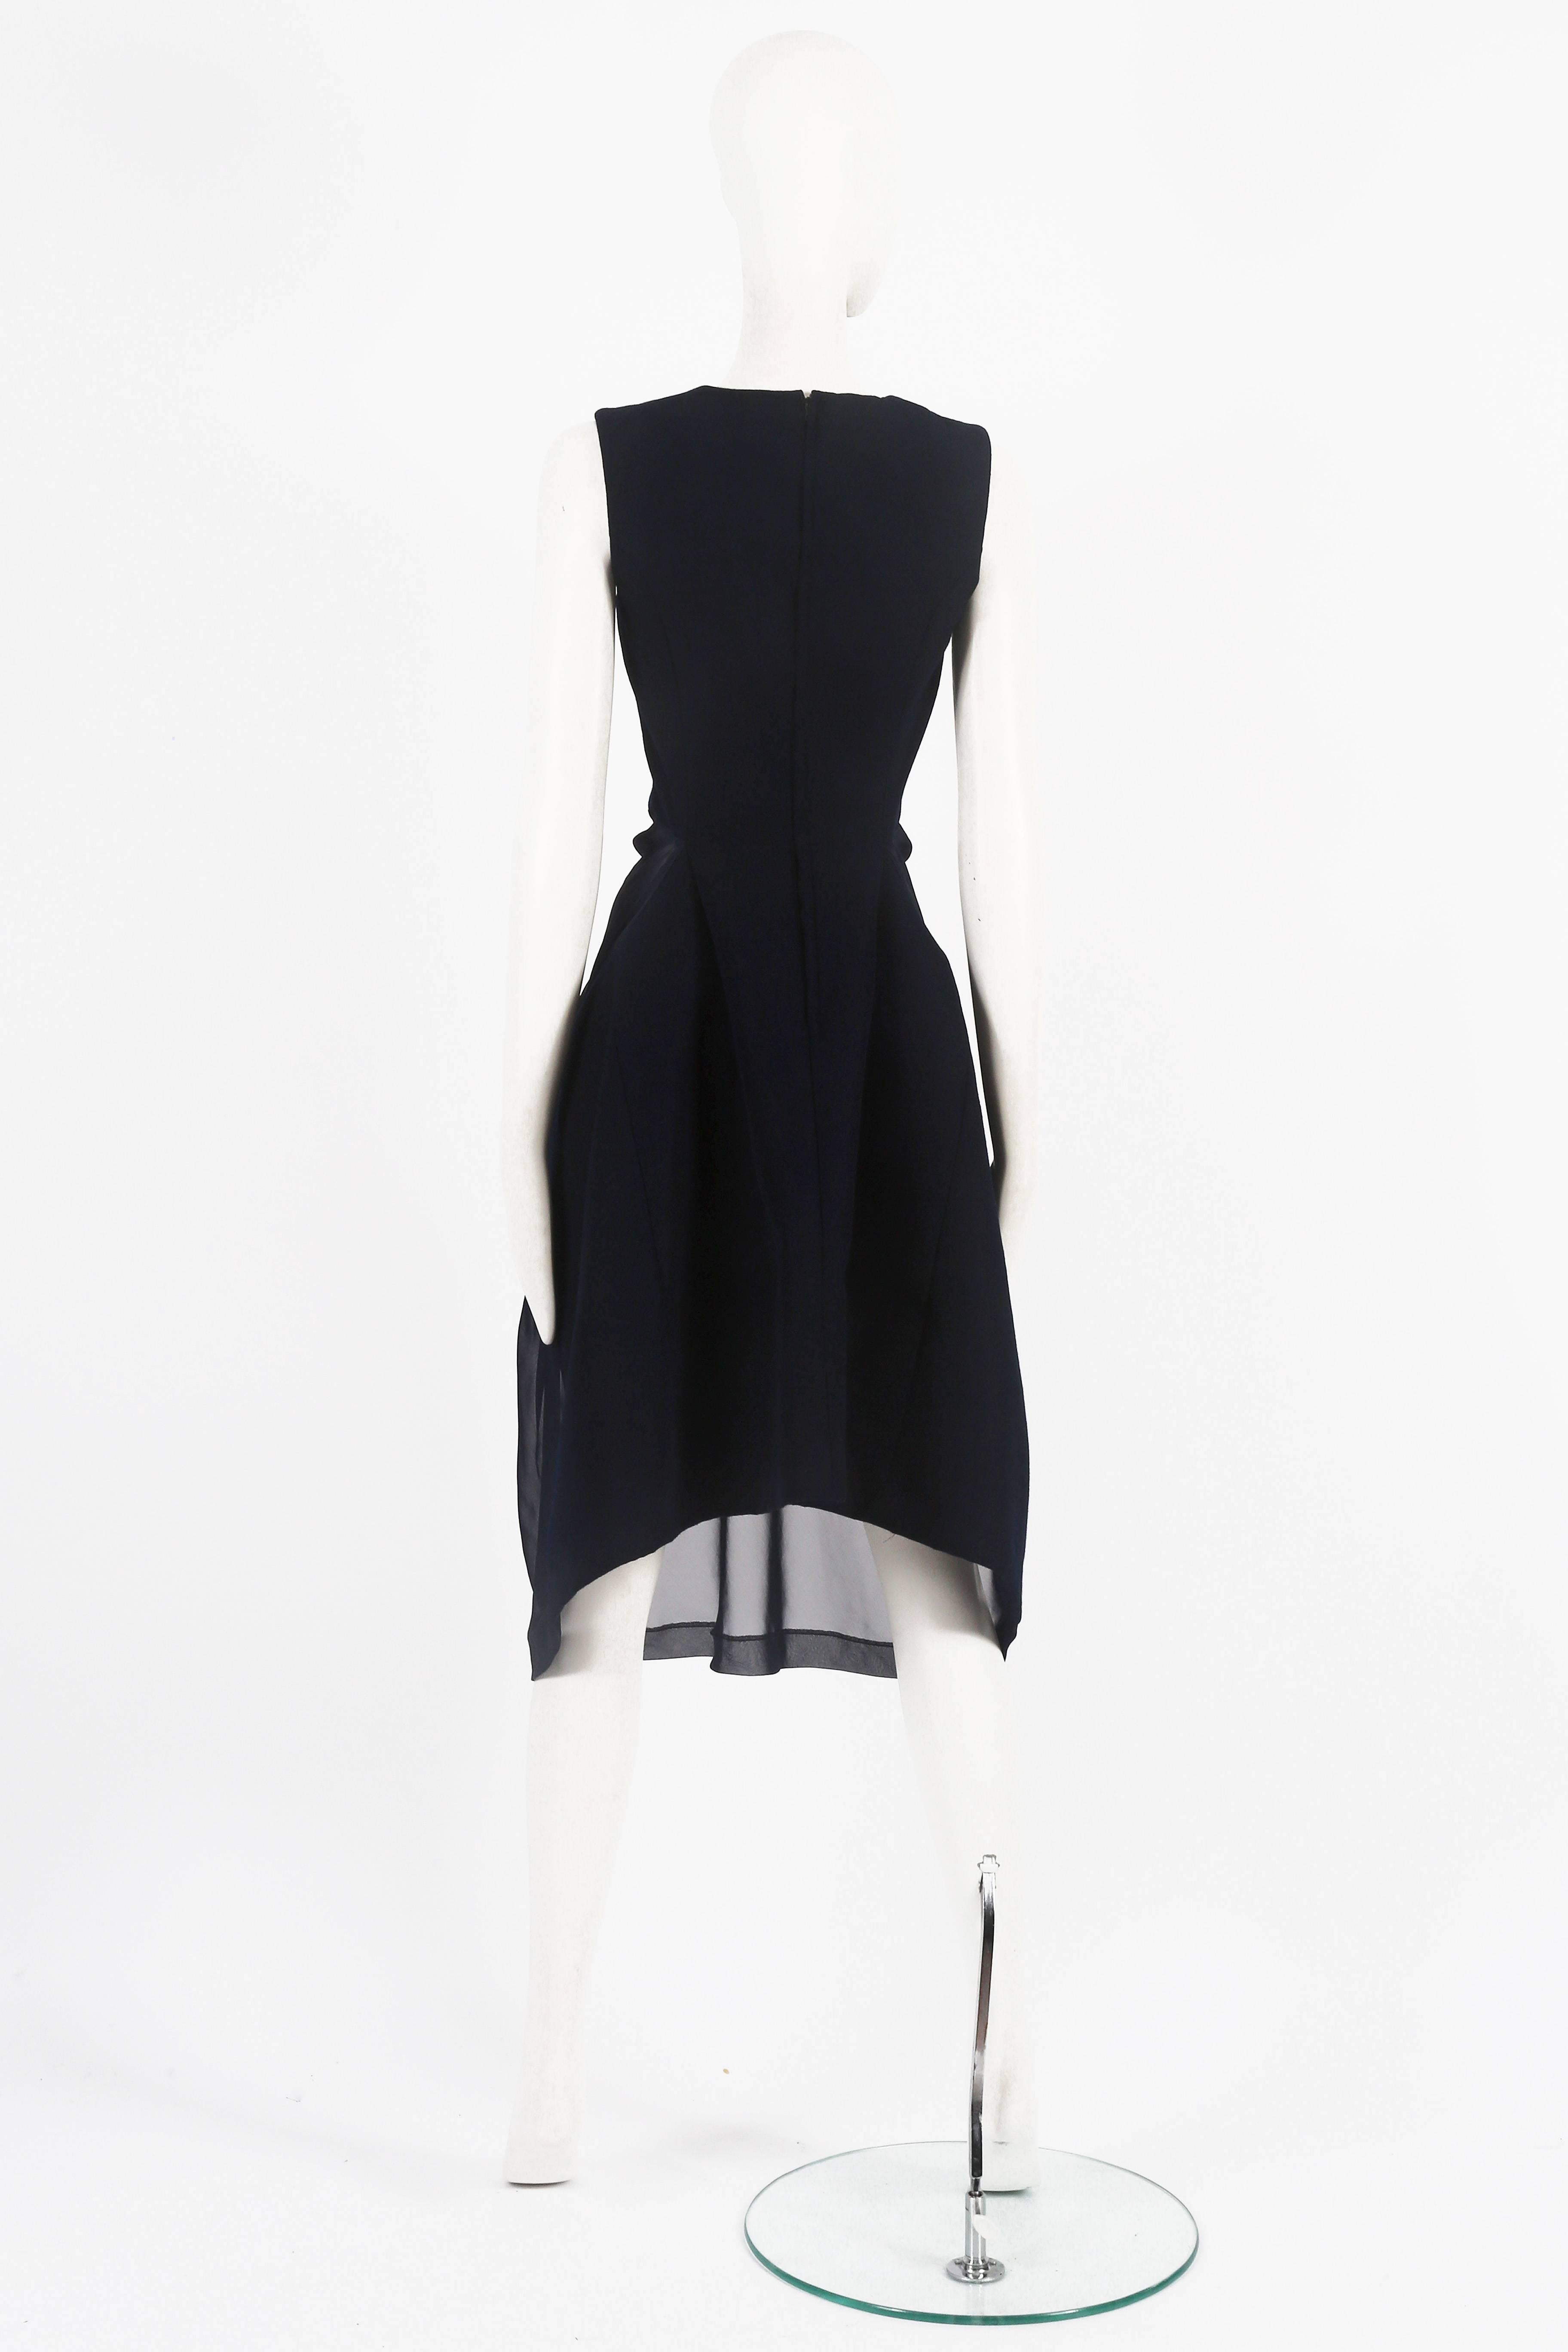 Comme des Garcons deconstructed wool and chiffon dress, fw 1997 For Sale 1